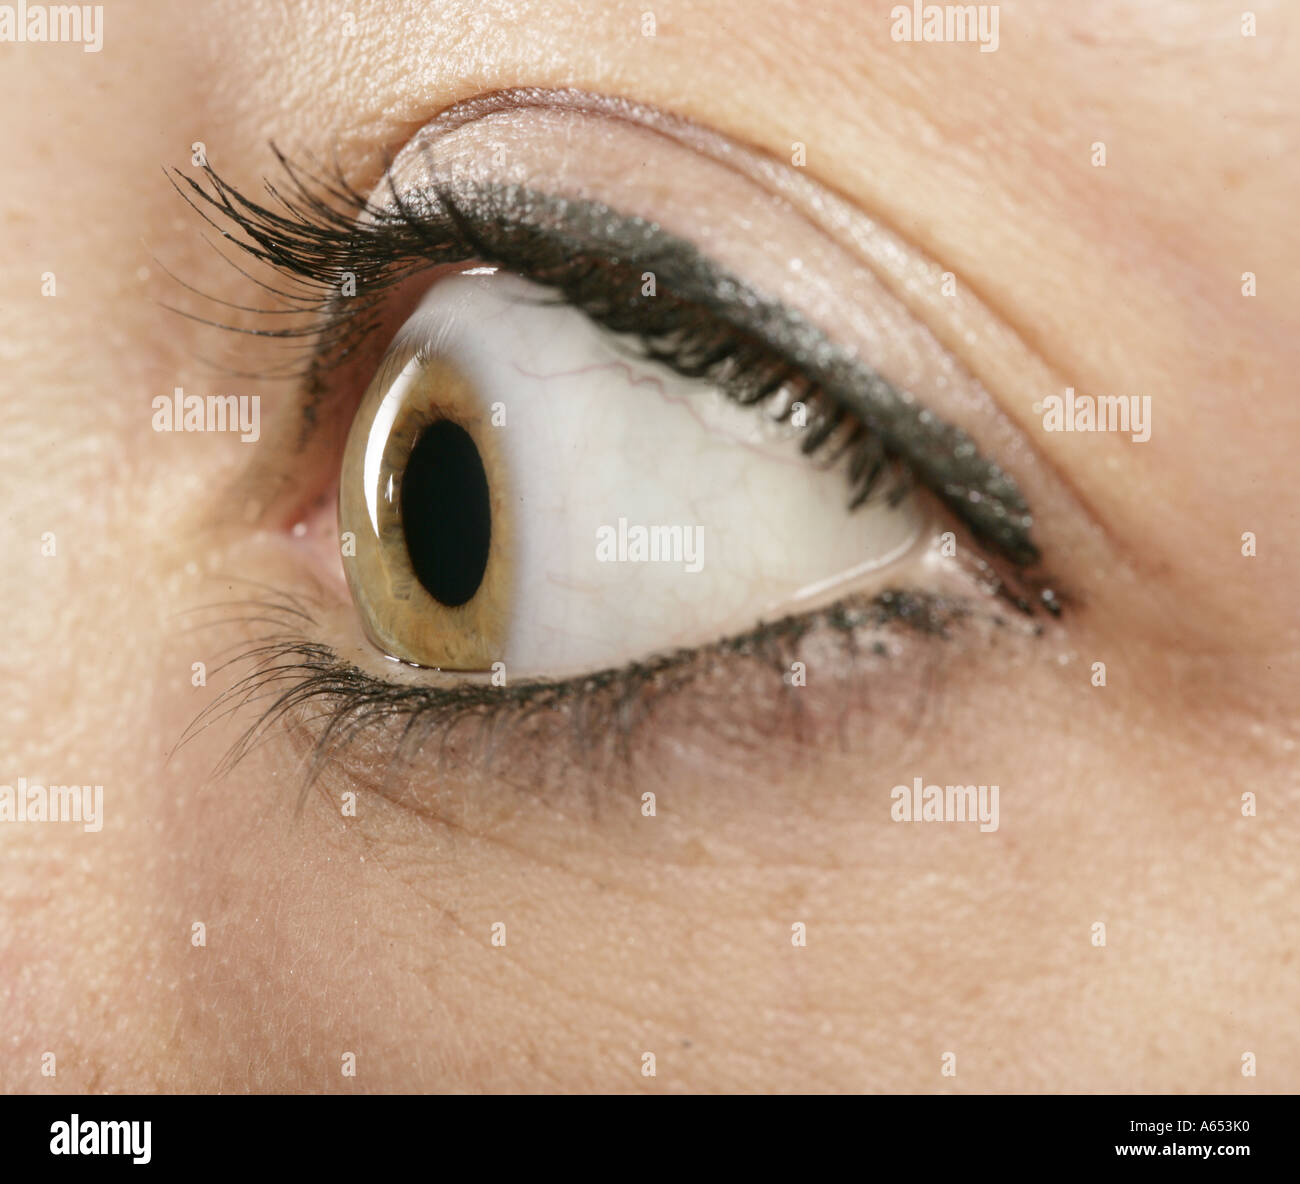 Profile close-up of a woman's eye. Stock Photo